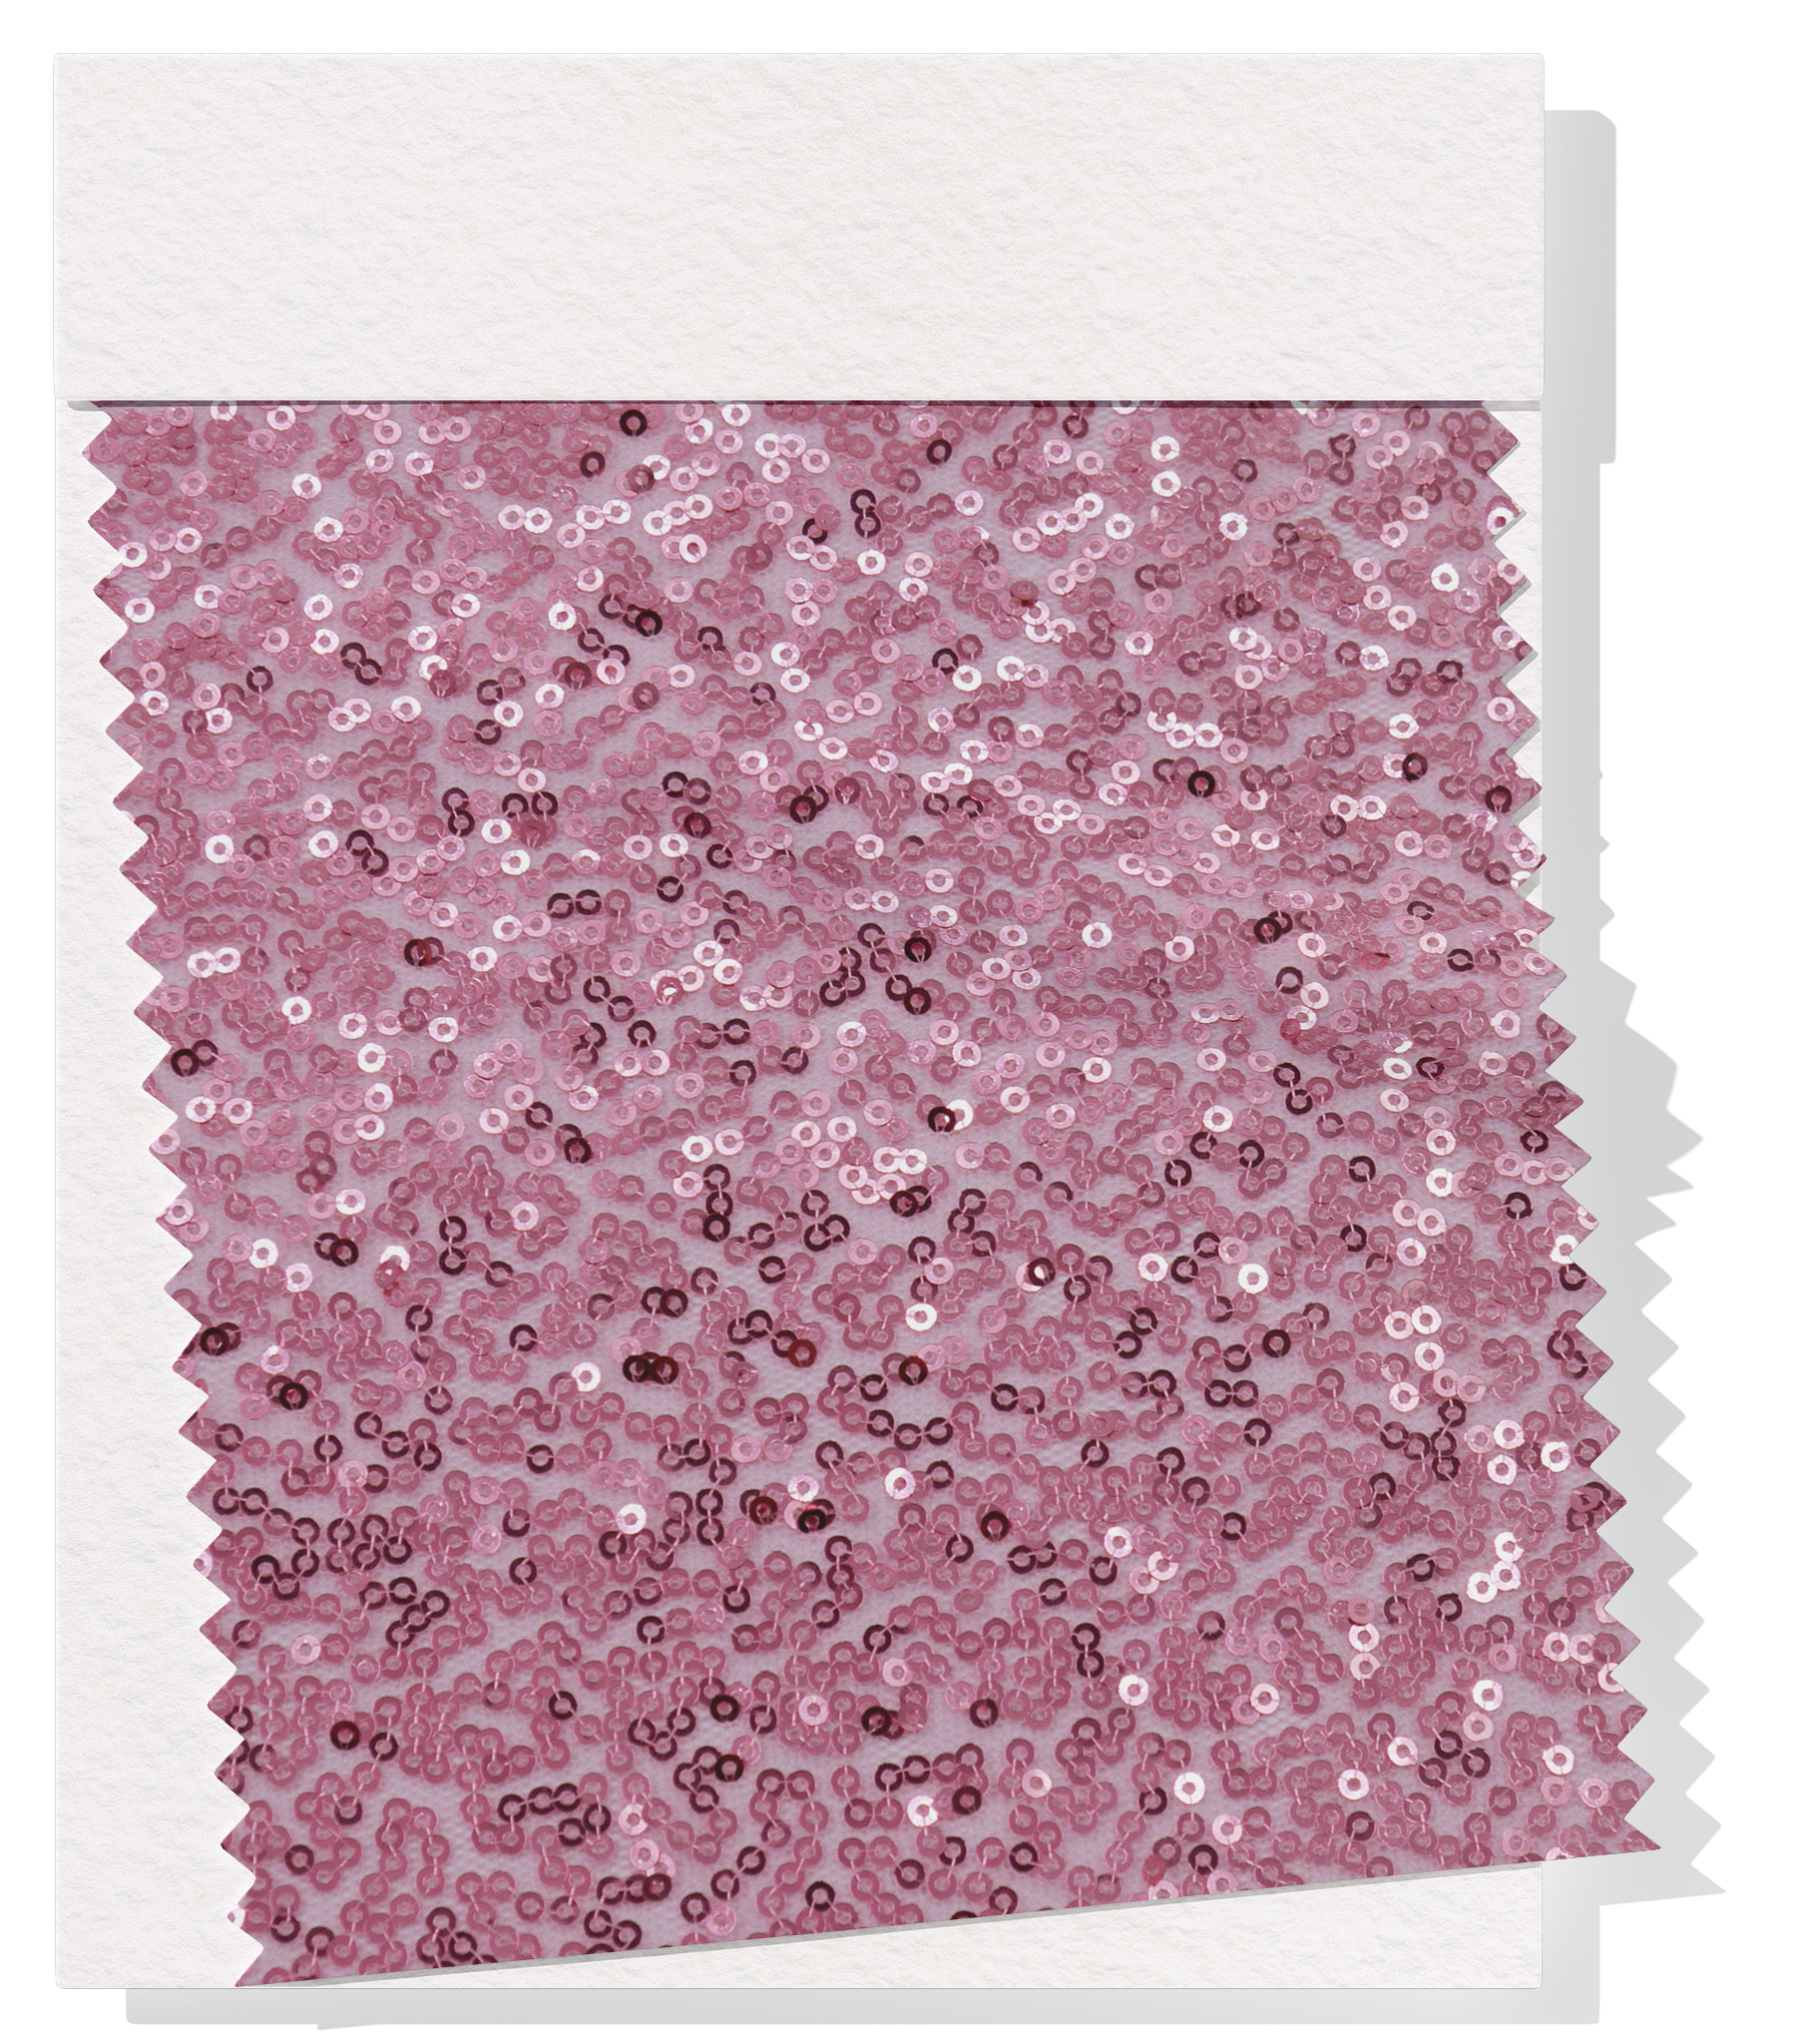 Polyester Mesh Sequins $25.00p/m - Pink